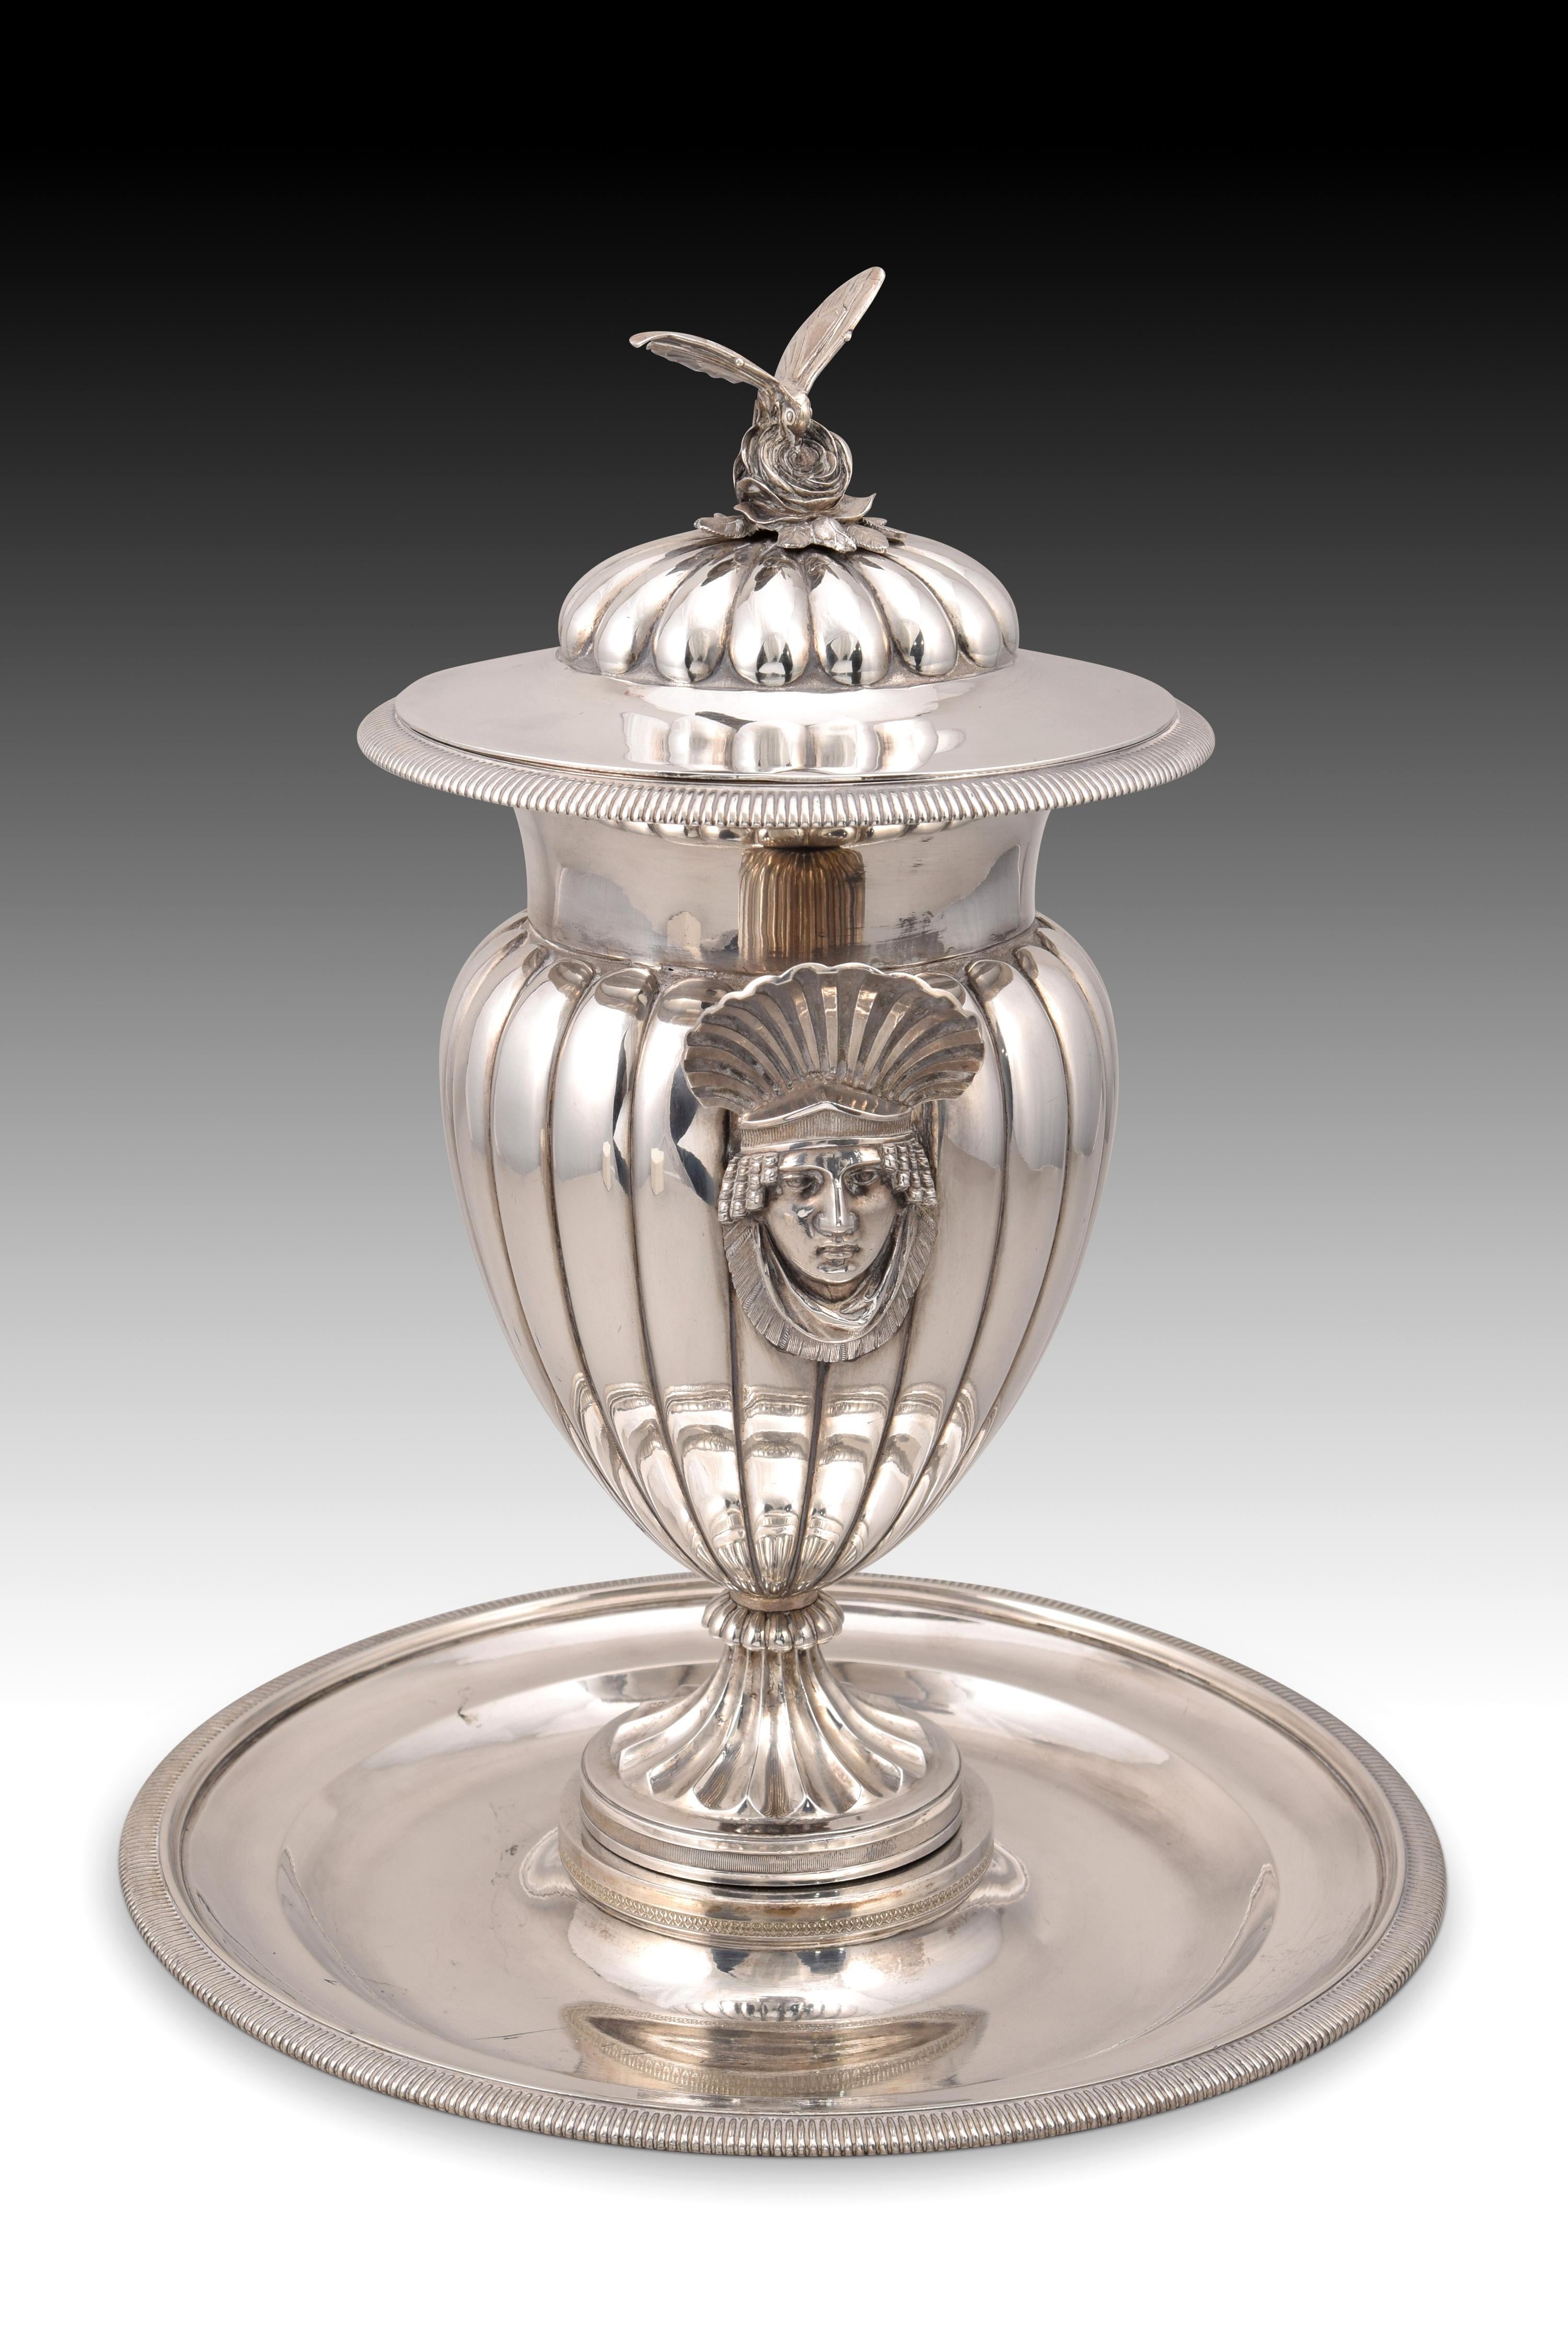 Cup with tray. Silver. Royal Silver Factory of Antonio Martínez. Madrid, Spain, 1830s. 
Model cataloged in 